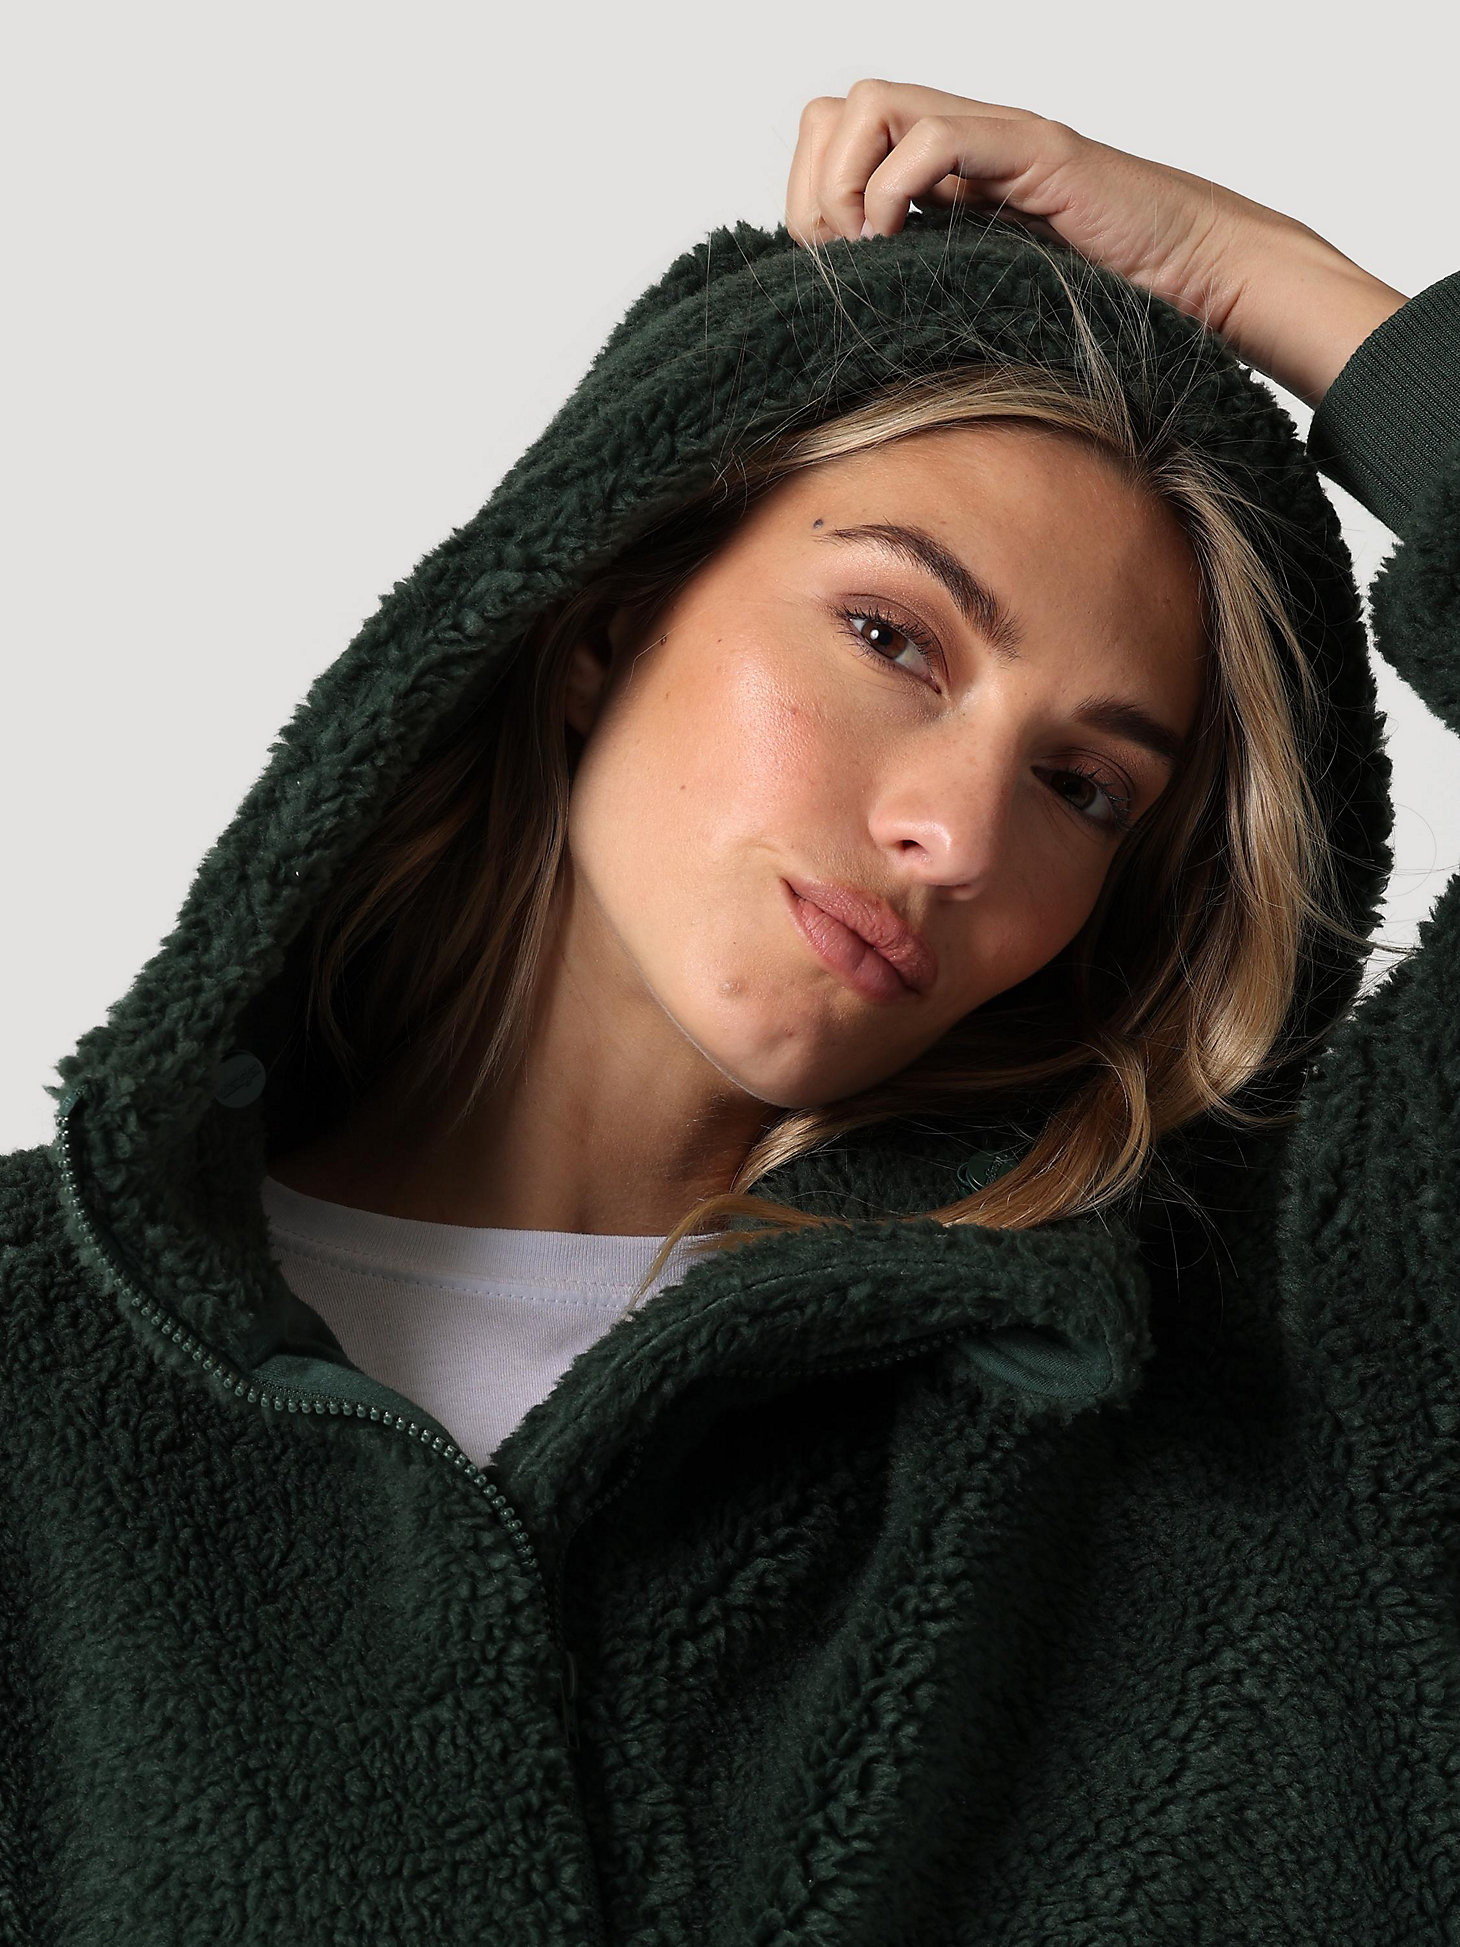 Women's Hooded Sherpa Jacket in Sycamore Green alternative view 3